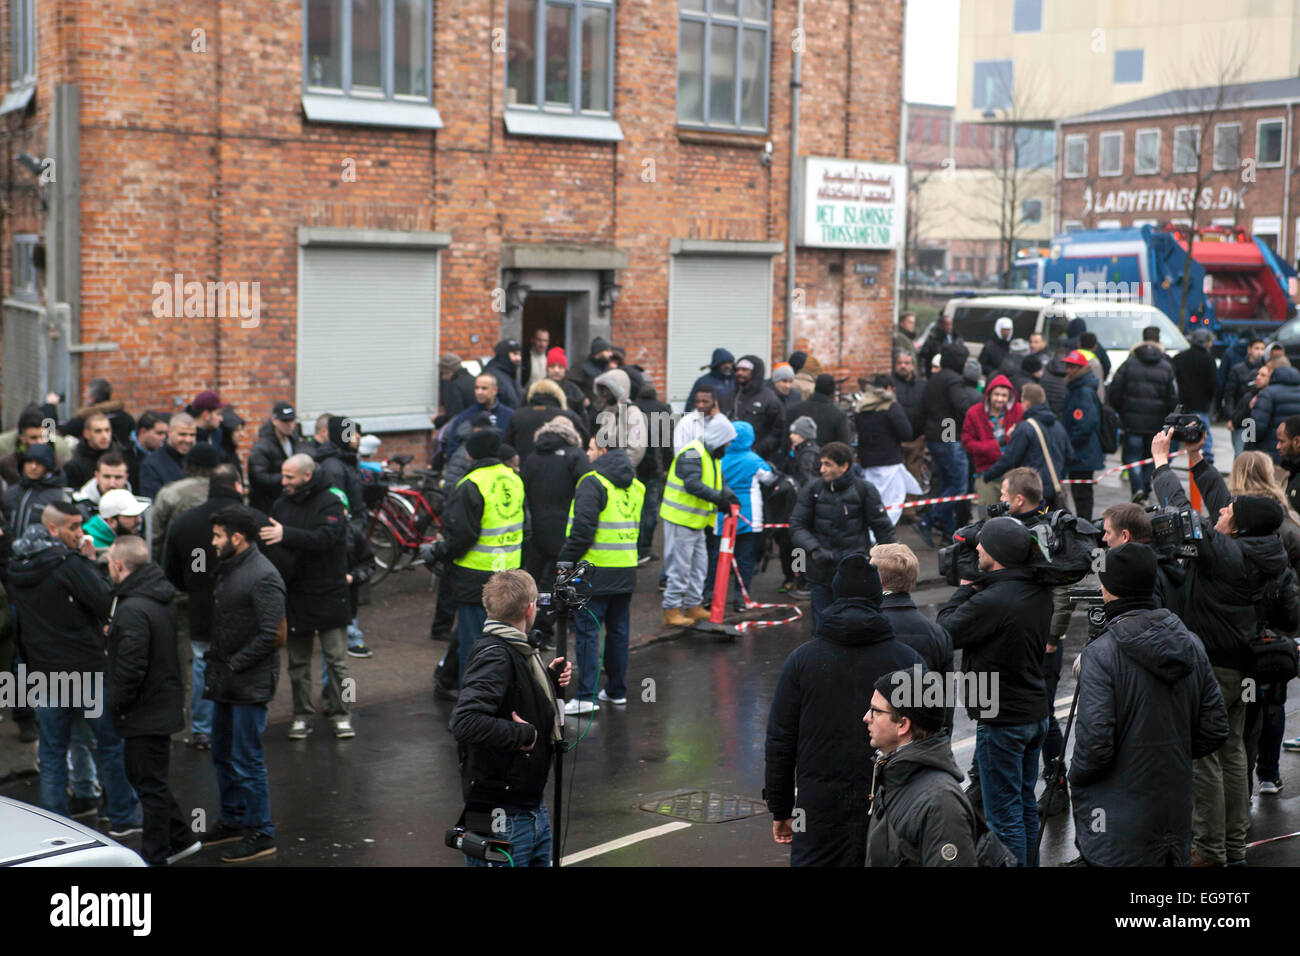 Copenhagen, Denmark. 20th February, 2015. A crowd of bystanders and media people is gathered at the mosque in north western Copenhagen where the funeral prayer for the alleged terror attacker,  Omar Abdel Hamid El-Hussein (age 22), takes place after the Friday prayer. Hussein is the alleged perpetrator behind the terror attacks Feb 14 & 15 in Copenhagen, where 2 people was killed and 5 police officers wounded. Hussein died in a shootout with the police early Sunday morning Credit:  OJPHOTOS/Alamy Live News Stock Photo